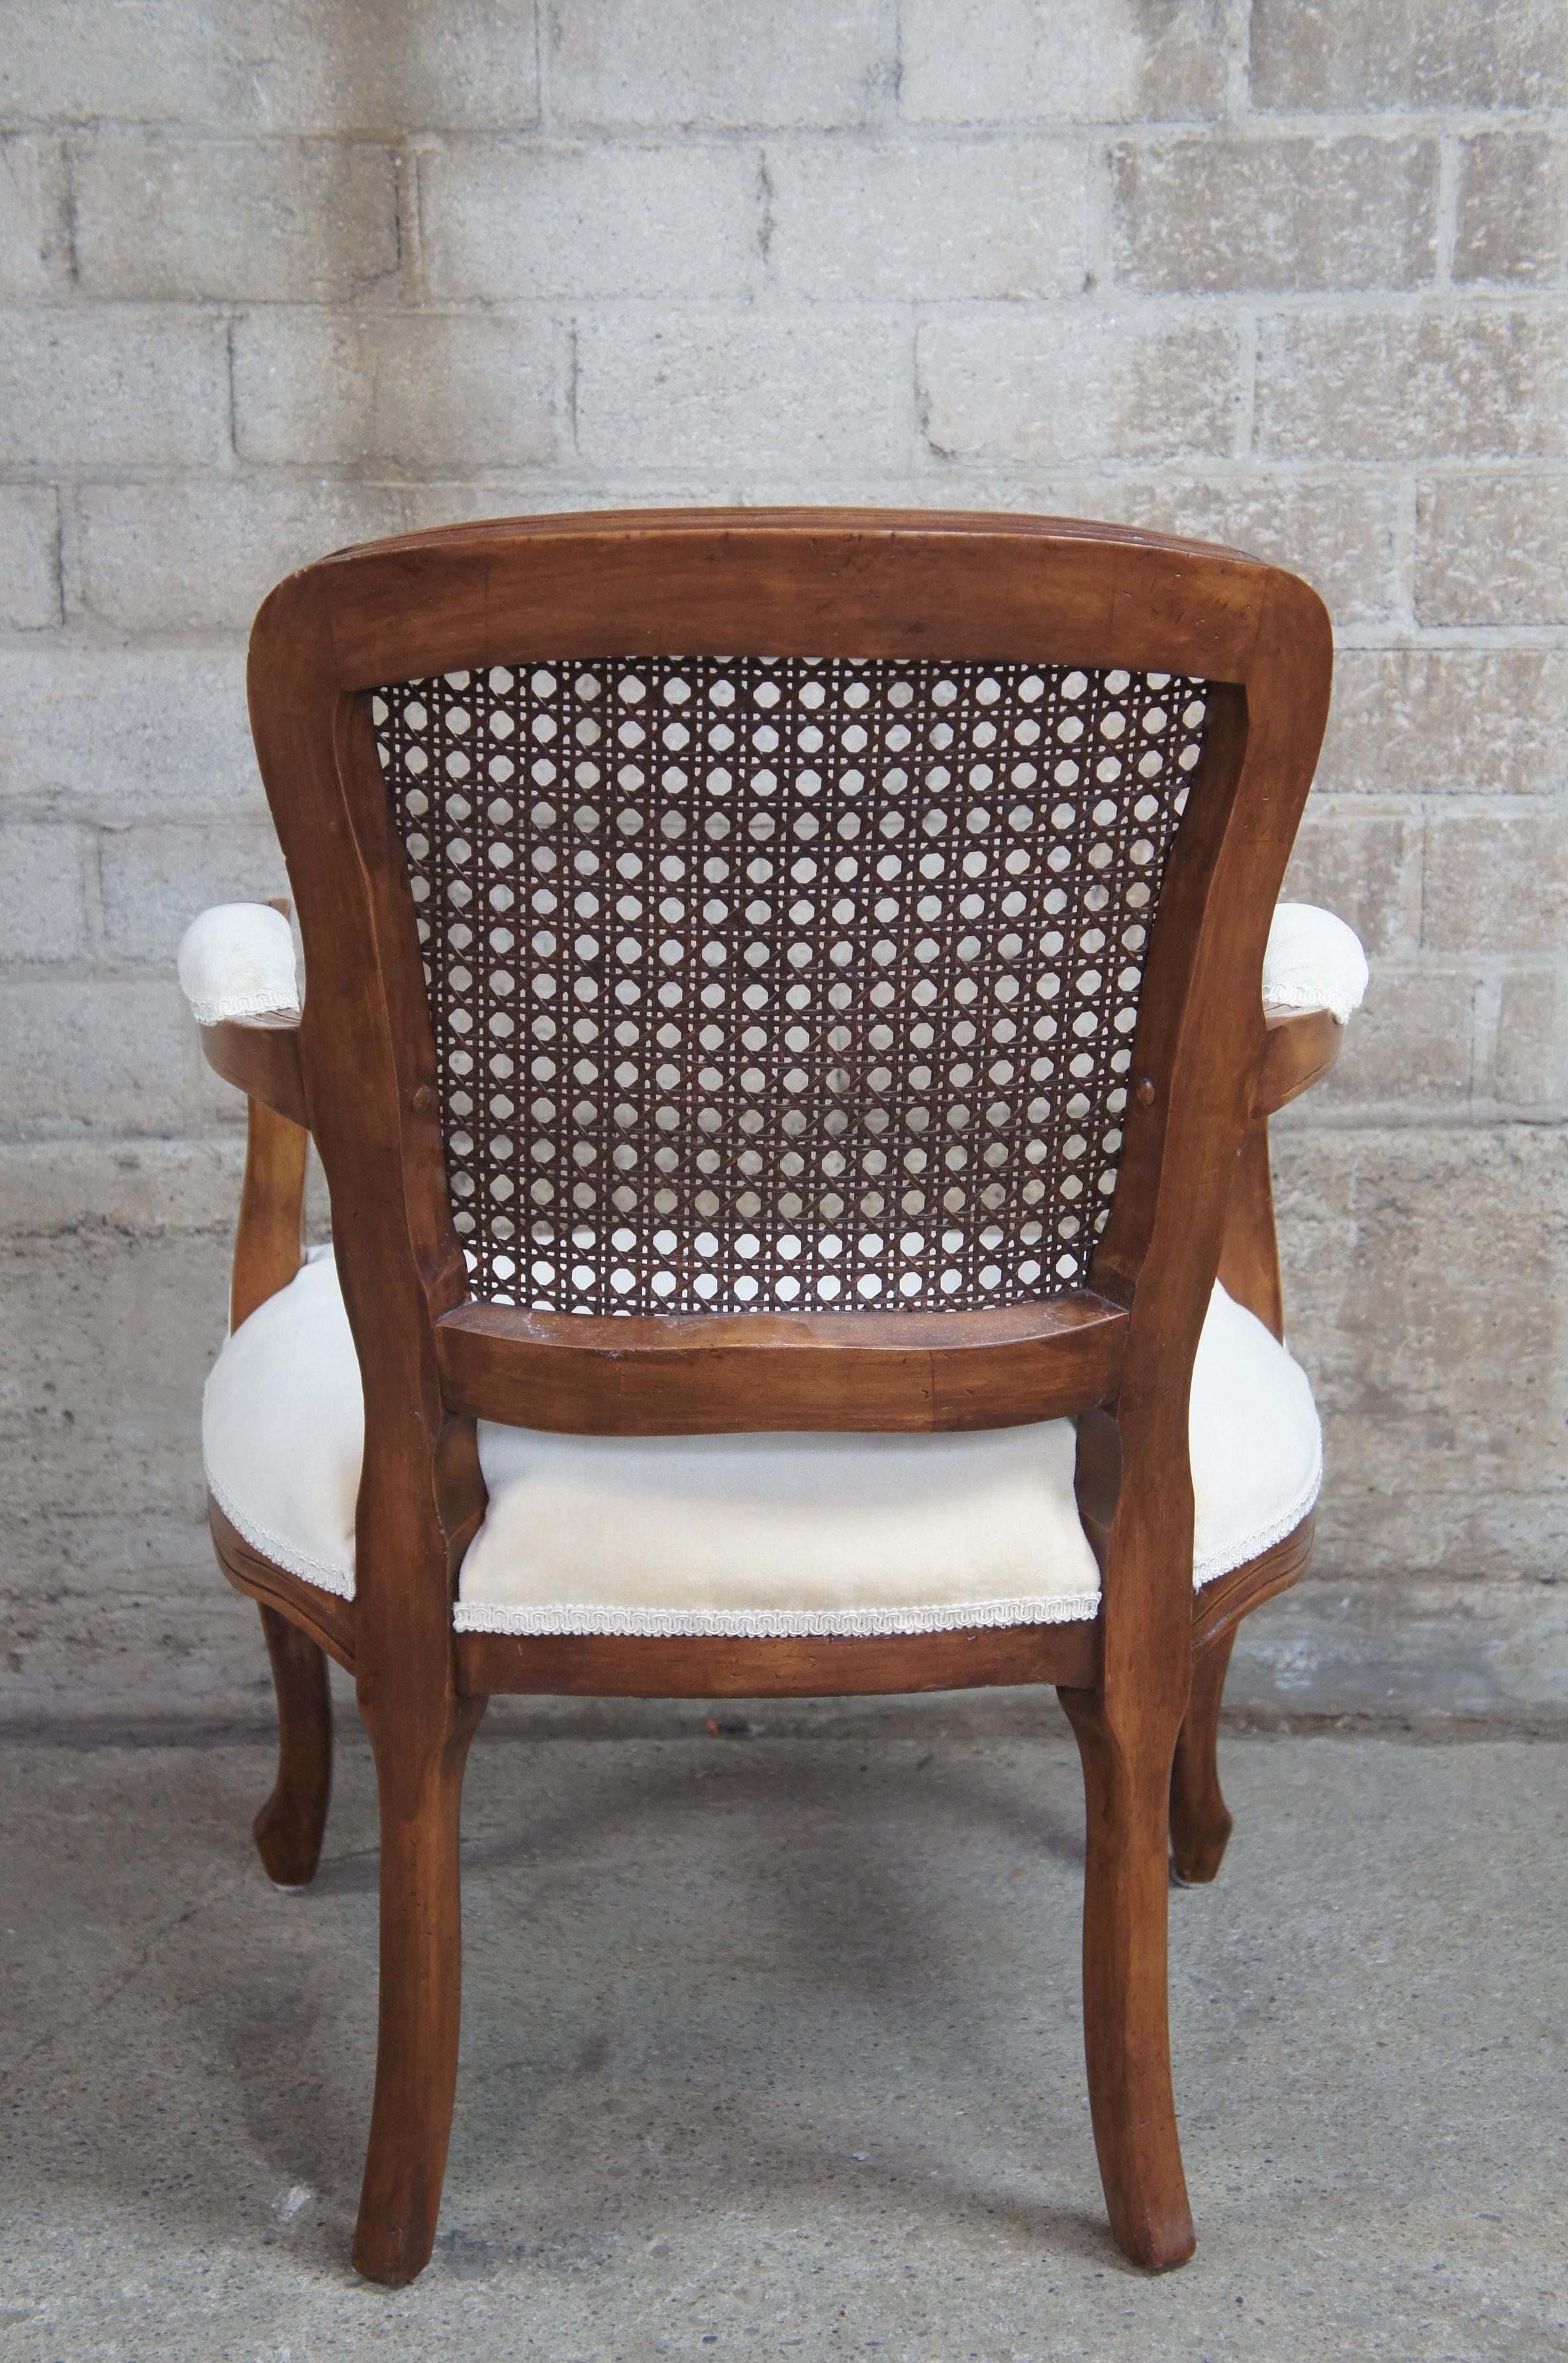 Upholstery 2 Antique French Provincial Walnut Cane Back Parlor Armchairs Fauteuil, Pair